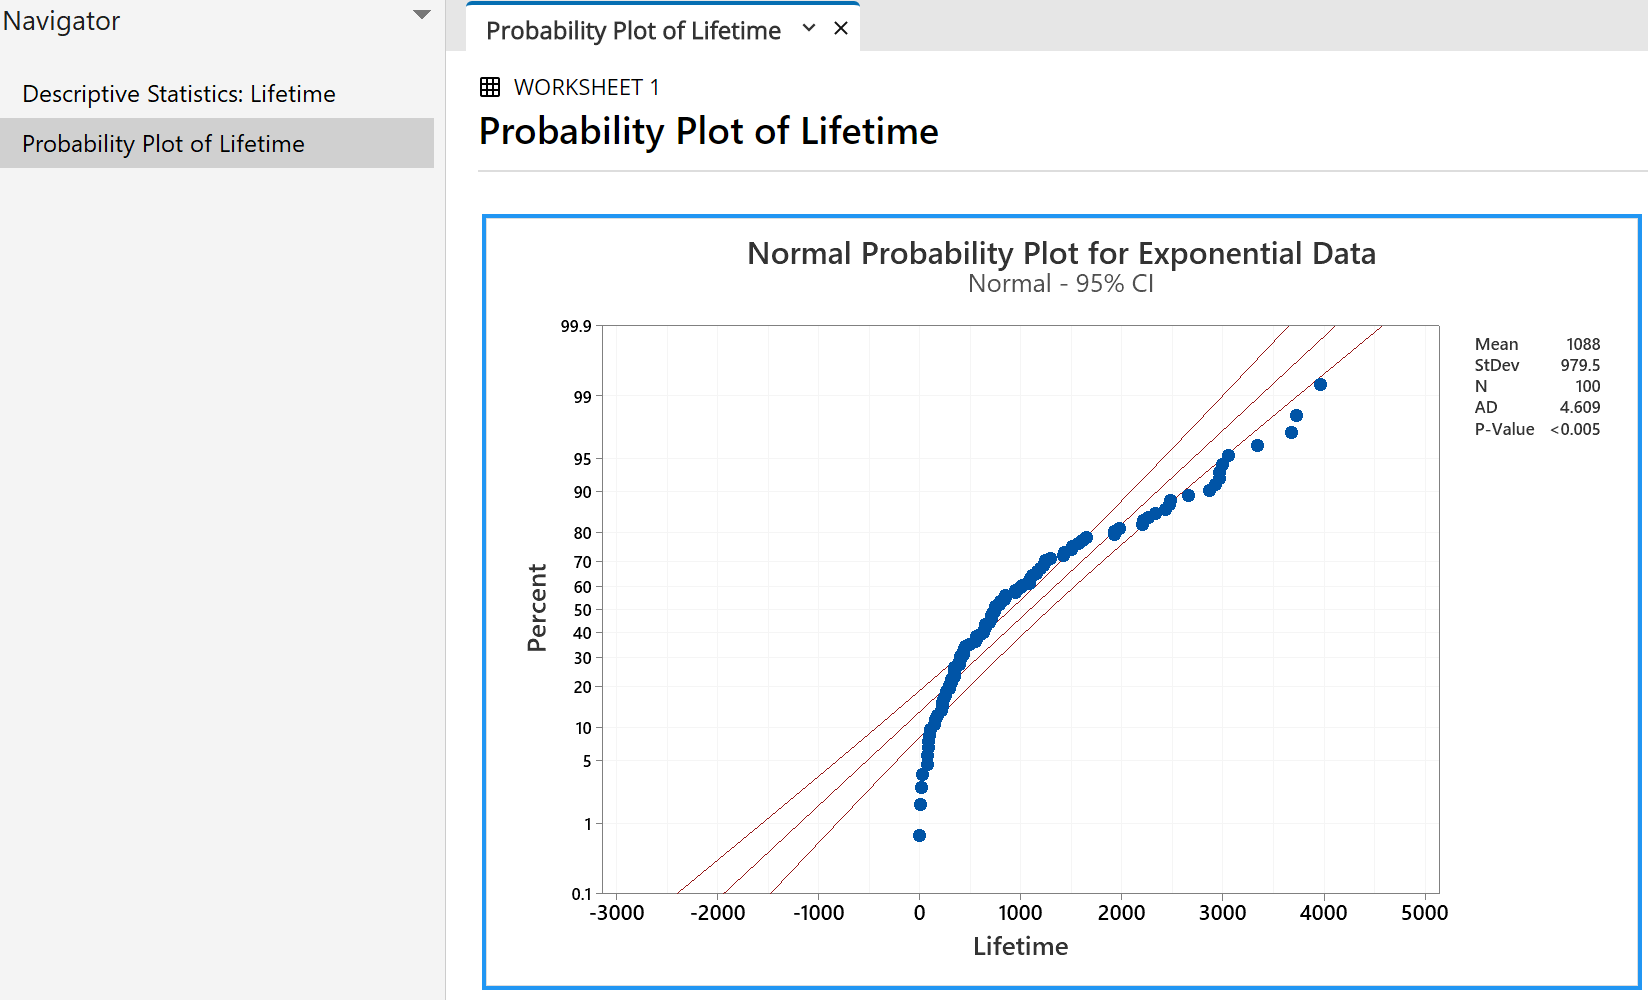 Normal Probability Plot for the Exponential Data, 
 showing severe departures from a straight line.